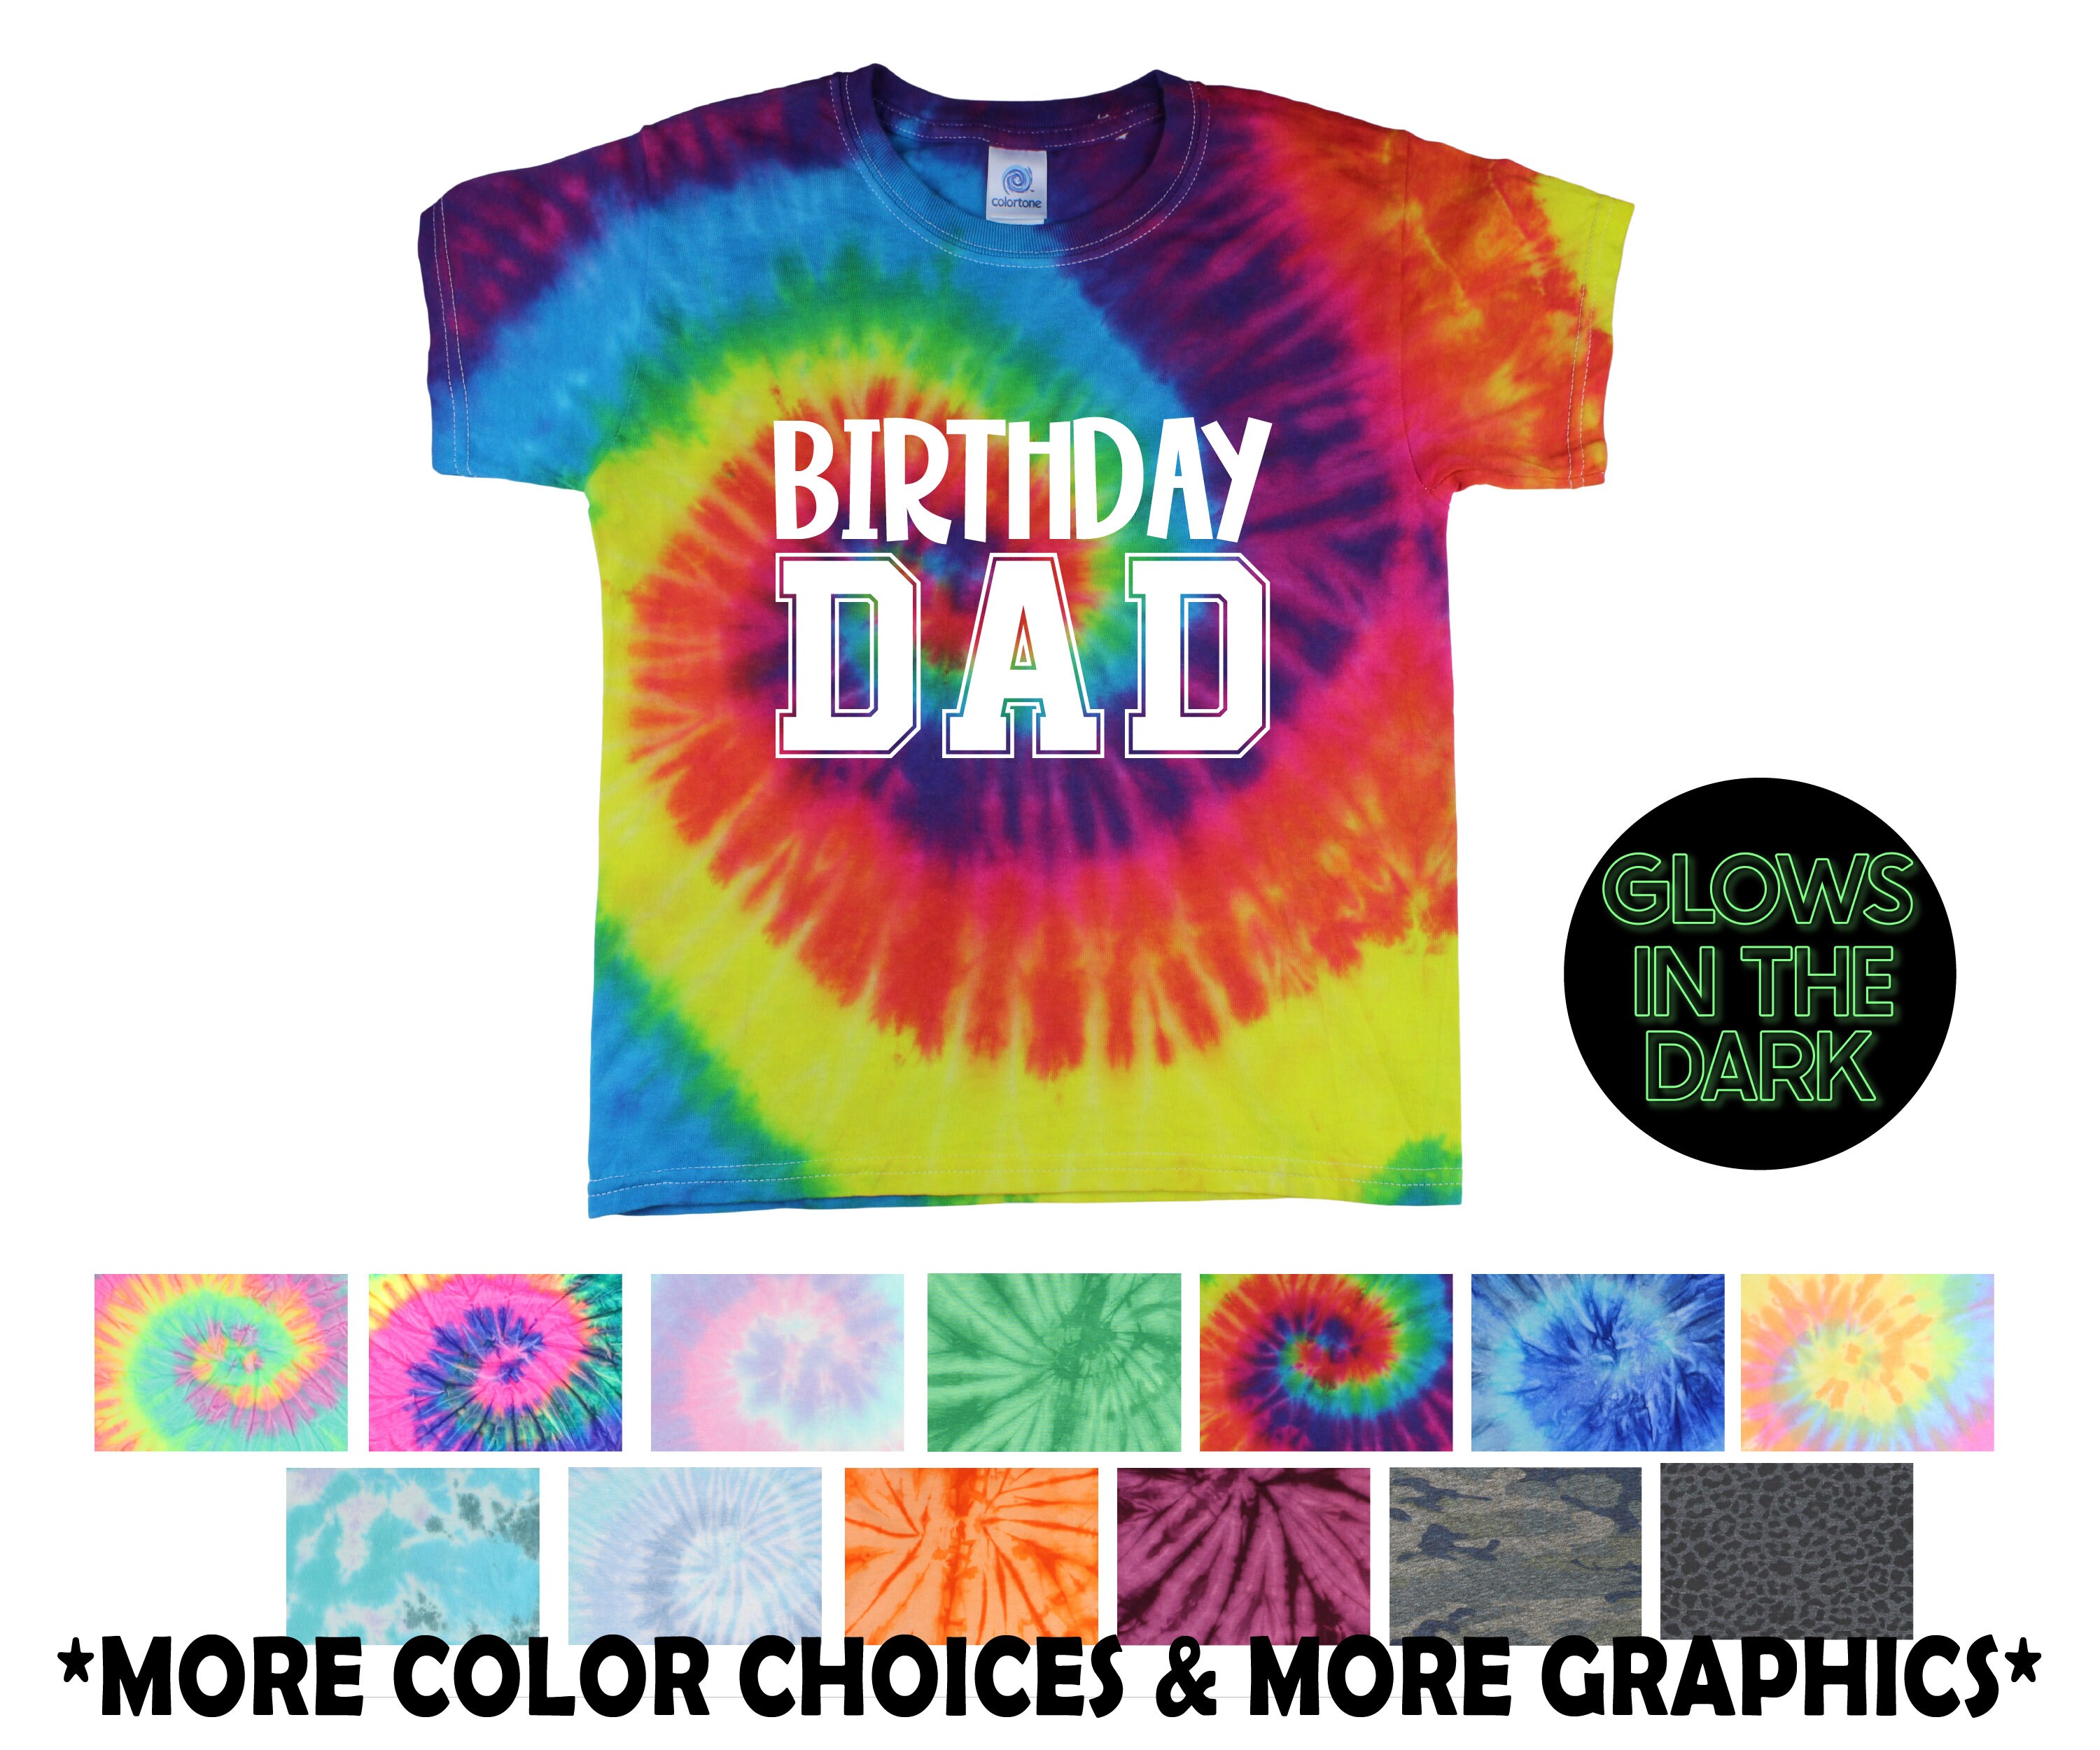 7 Fun Glow In The Dark Party Ideas — Every Thing For Dads